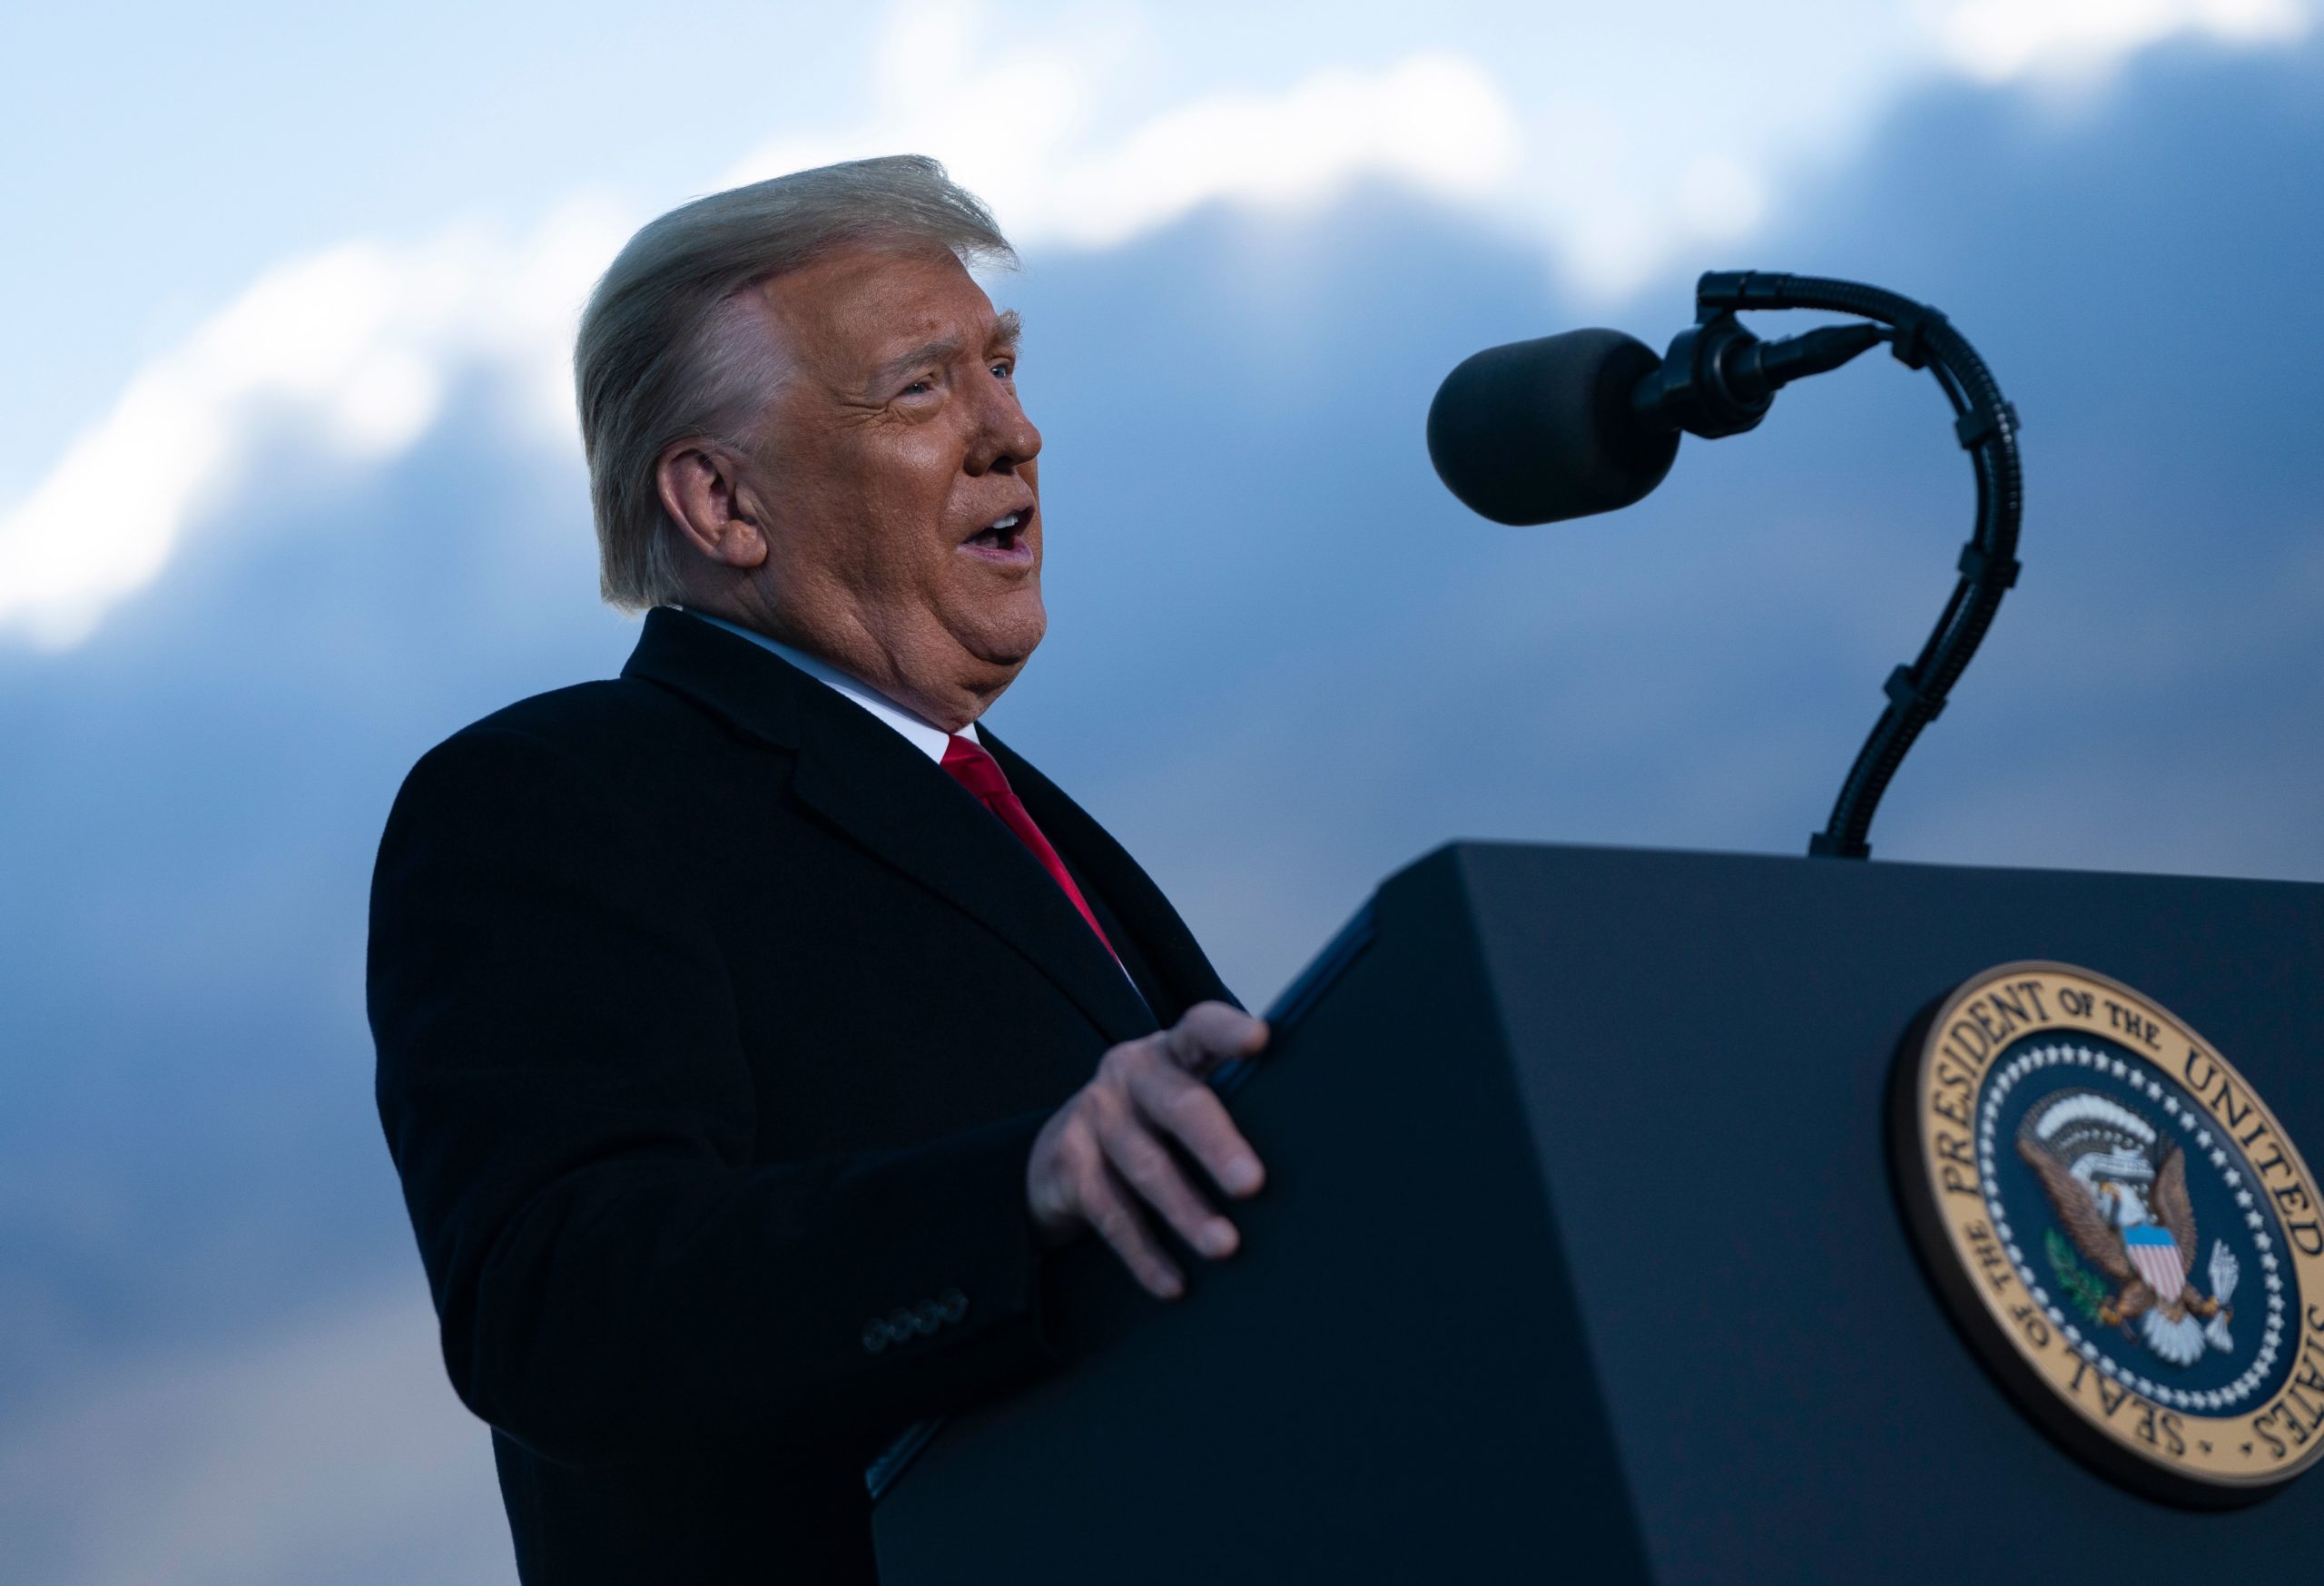 Outgoing US President Donald Trump addresses guests at Joint Base Andrews in Maryland on January 20, 2021. - President Trump and the First Lady travel to their Mar-a-Lago golf club residence in Palm Beach, Florida, and will not attend the inauguration for President-elect Joe Biden. (Photo by ALEX EDELMAN/AFP via Getty Images)